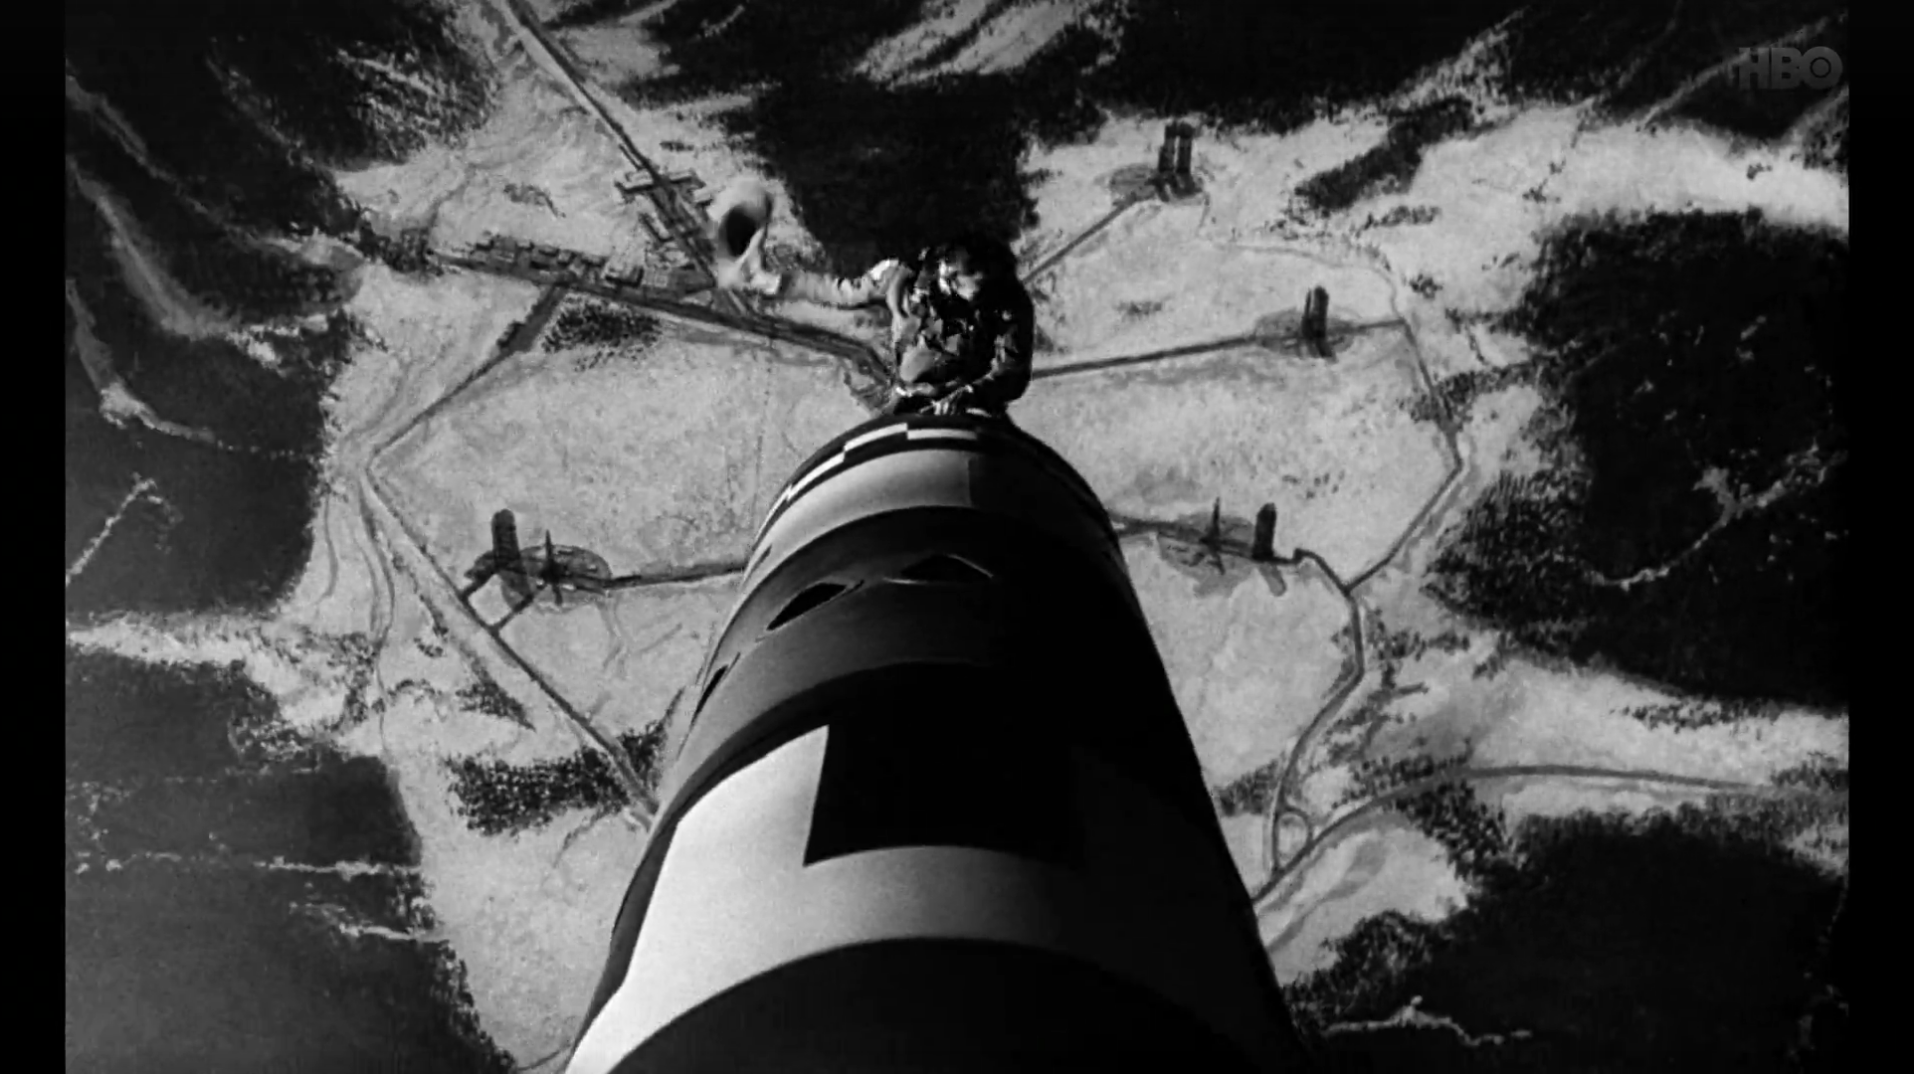 Screenshot from the film Dr. Strangelove in which Major T. J. “King” Kong rides a nuke down like a bucking bronko